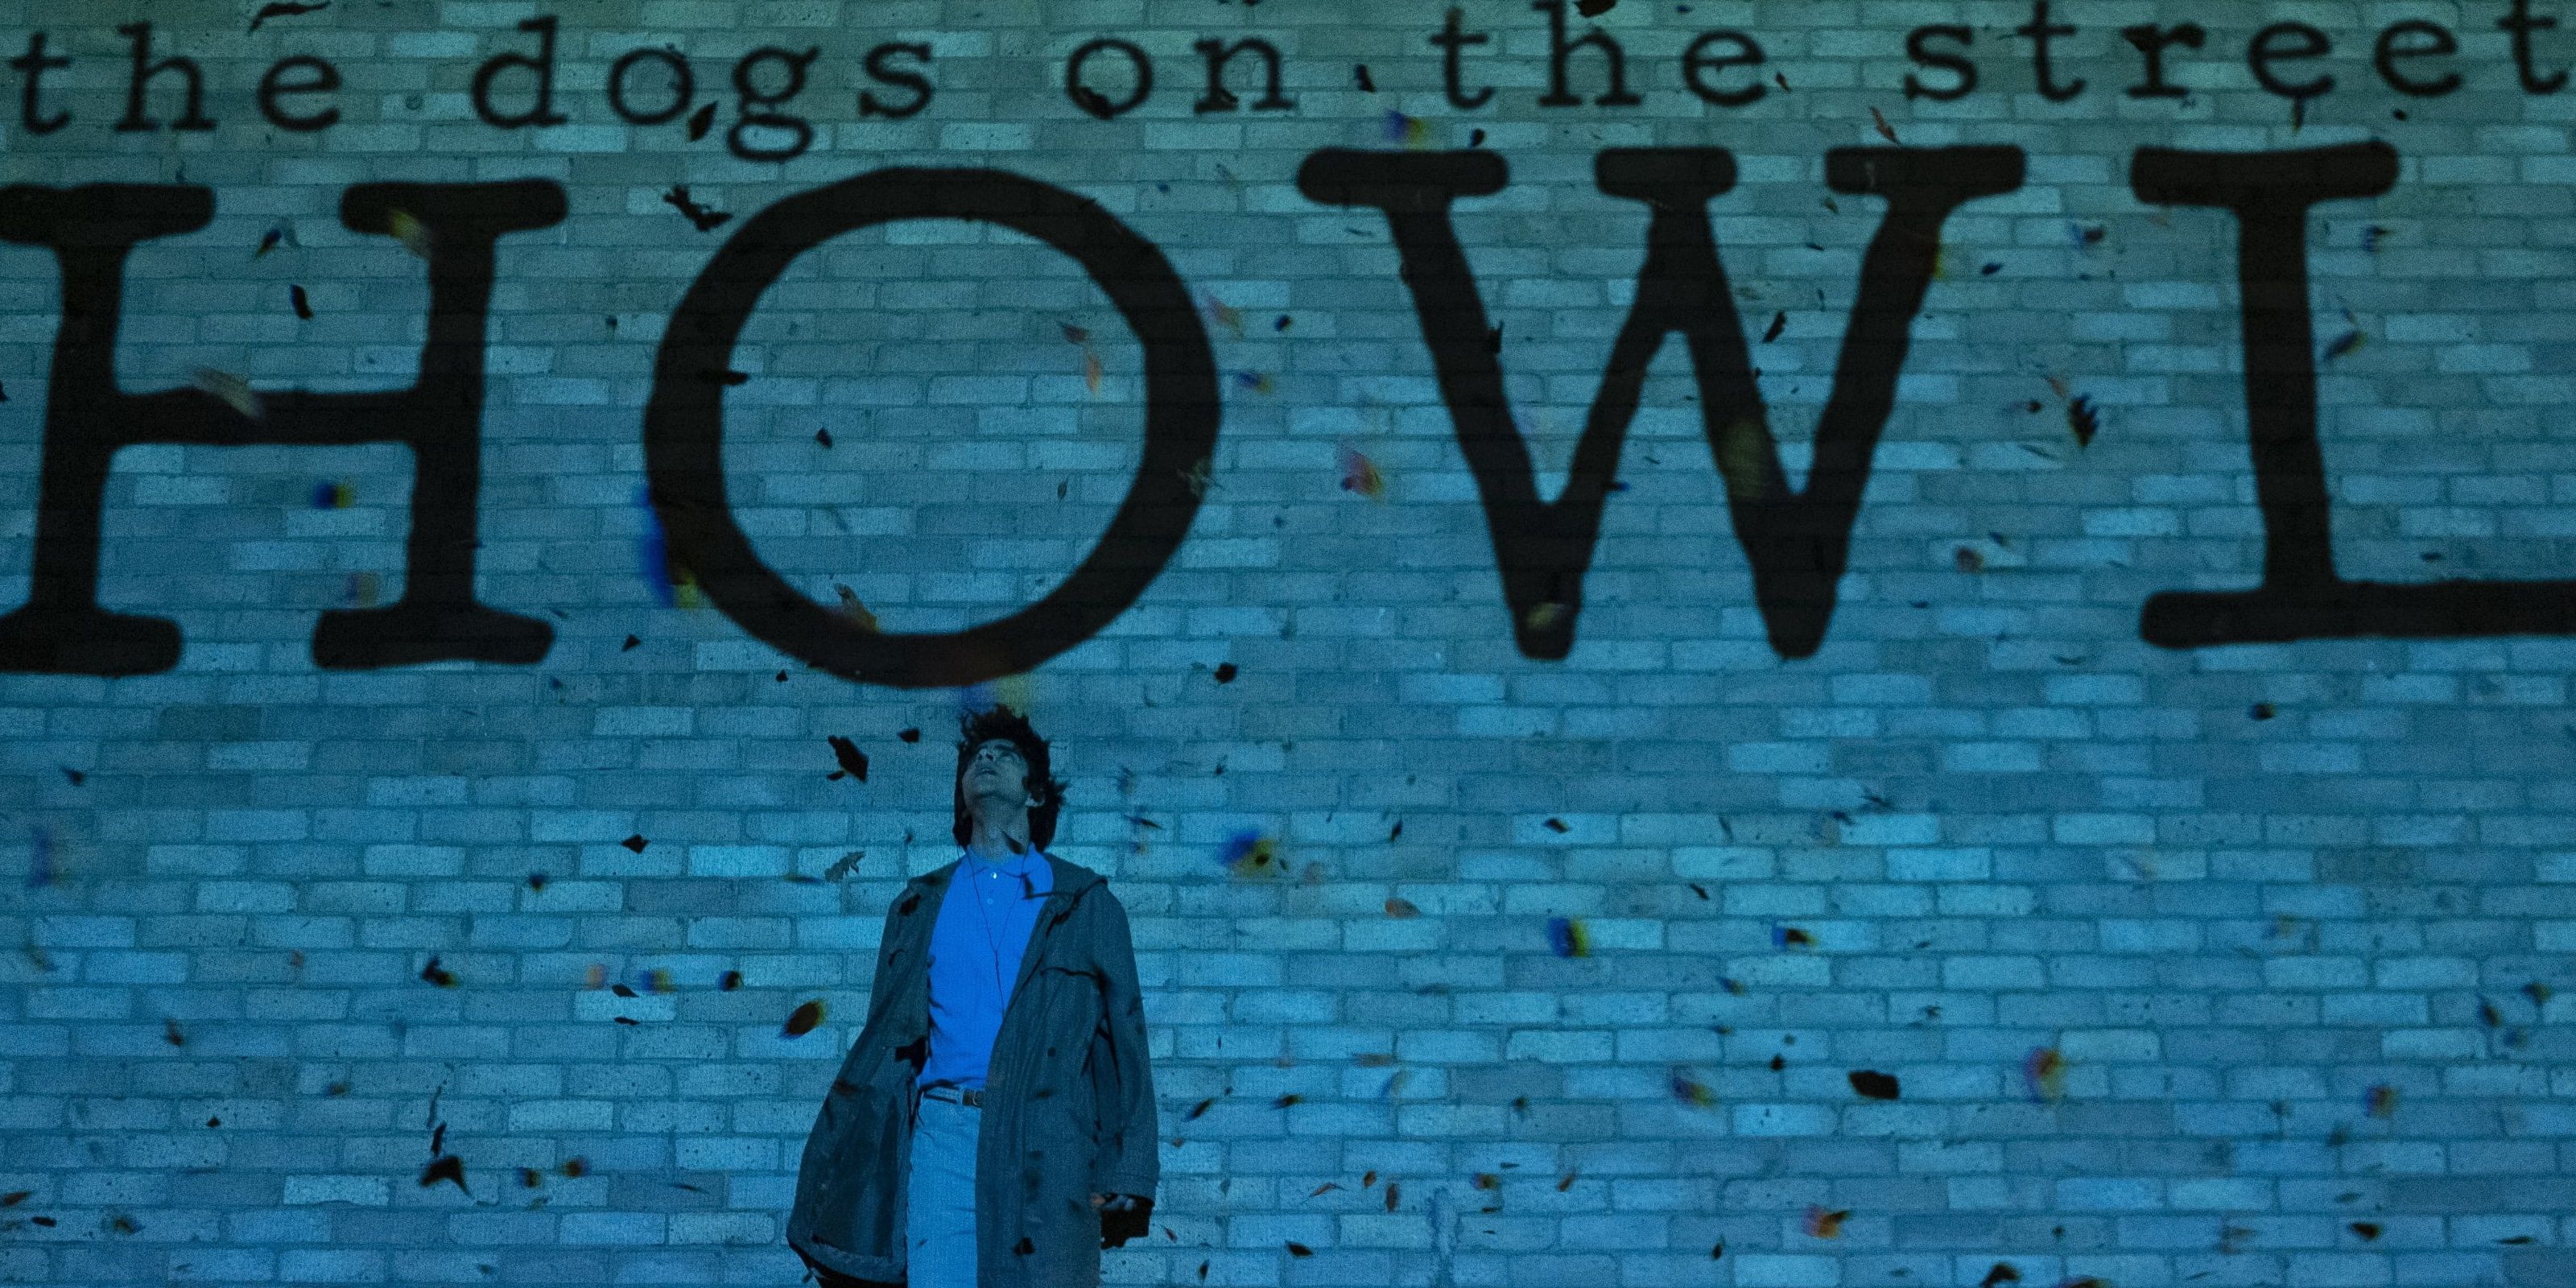 Javed standing against brick wall with the words &quot;The dogs on the street howl&quot; written above him